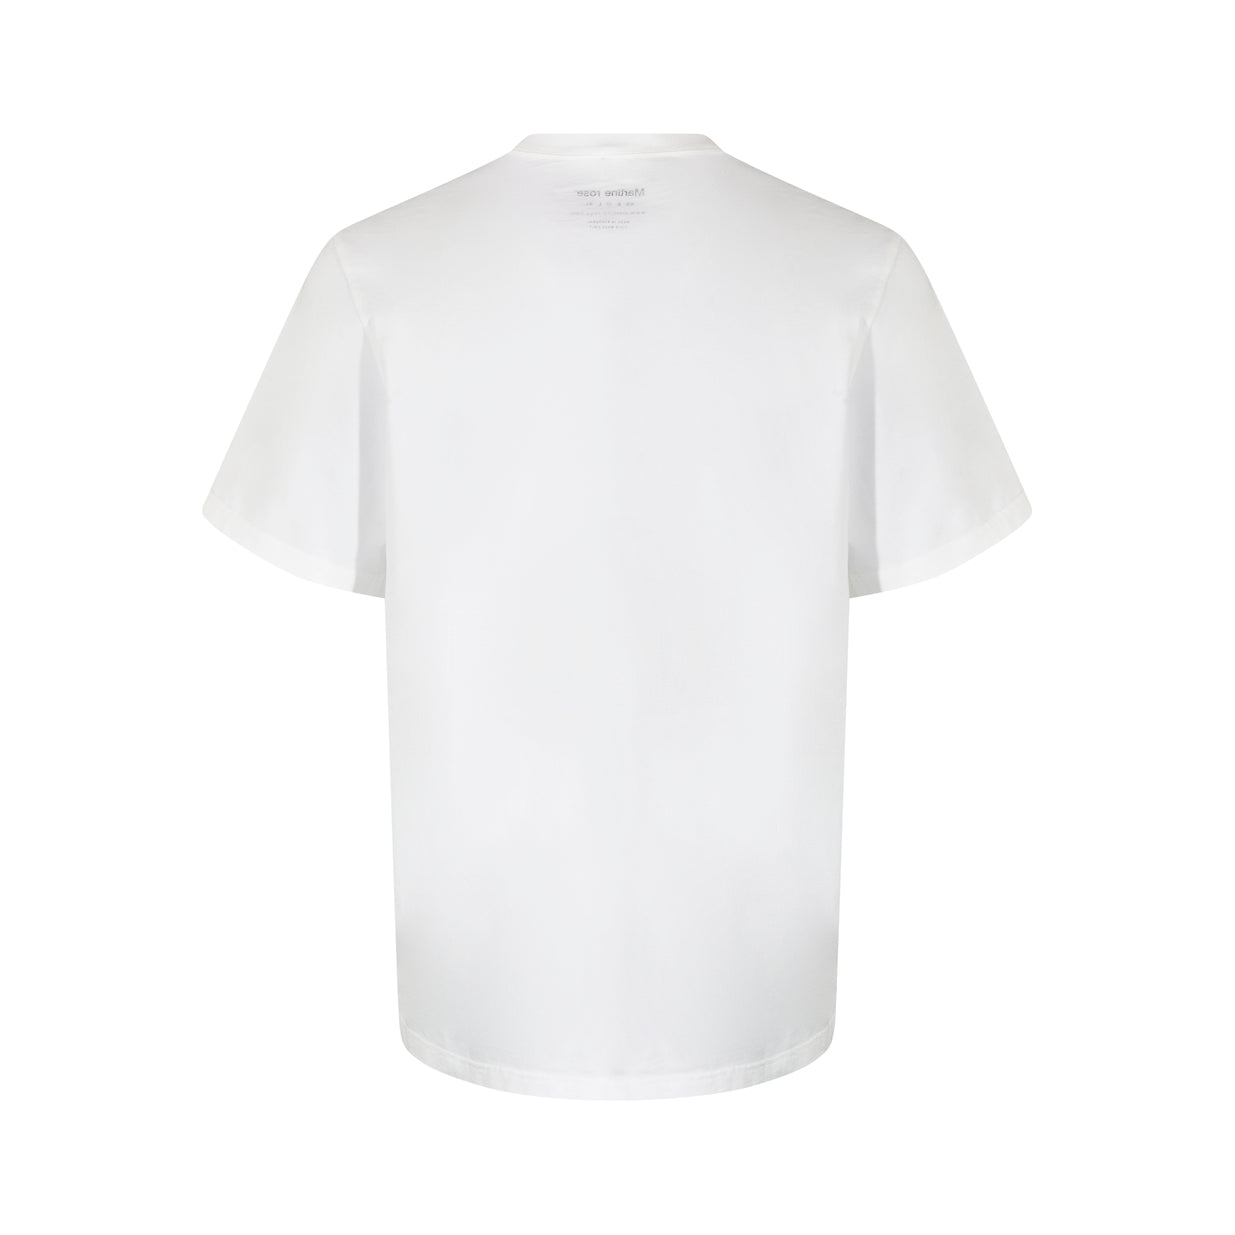 Classic S/S T-Shirt in White | Martine Rose